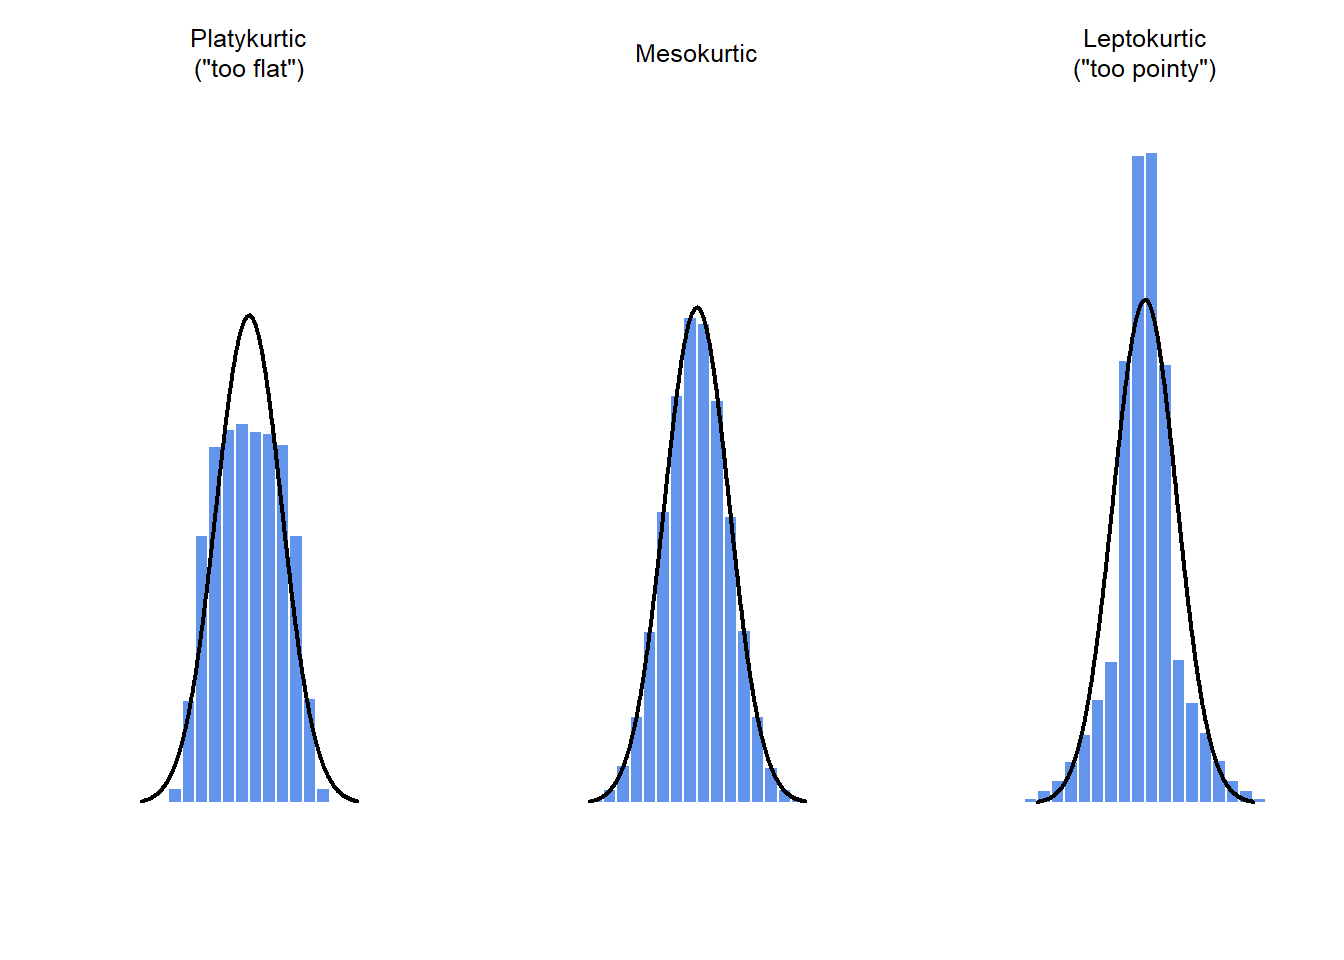 An illustration of kurtosis. On the left, we have a "platykurtic" data set (kurtosis = $-.95$), meaning that the data set is "too flat". In the middle we have a "mesokurtic" data set (kurtosis is almost exactly 0), which means that the pointiness of the data is just about right. Finally, on the right, we have a "leptokurtic" data set (kurtosis $= 2.12$) indicating that the data set is "too pointy". Note that kurtosis is measured with respect to a normal curve (black line)